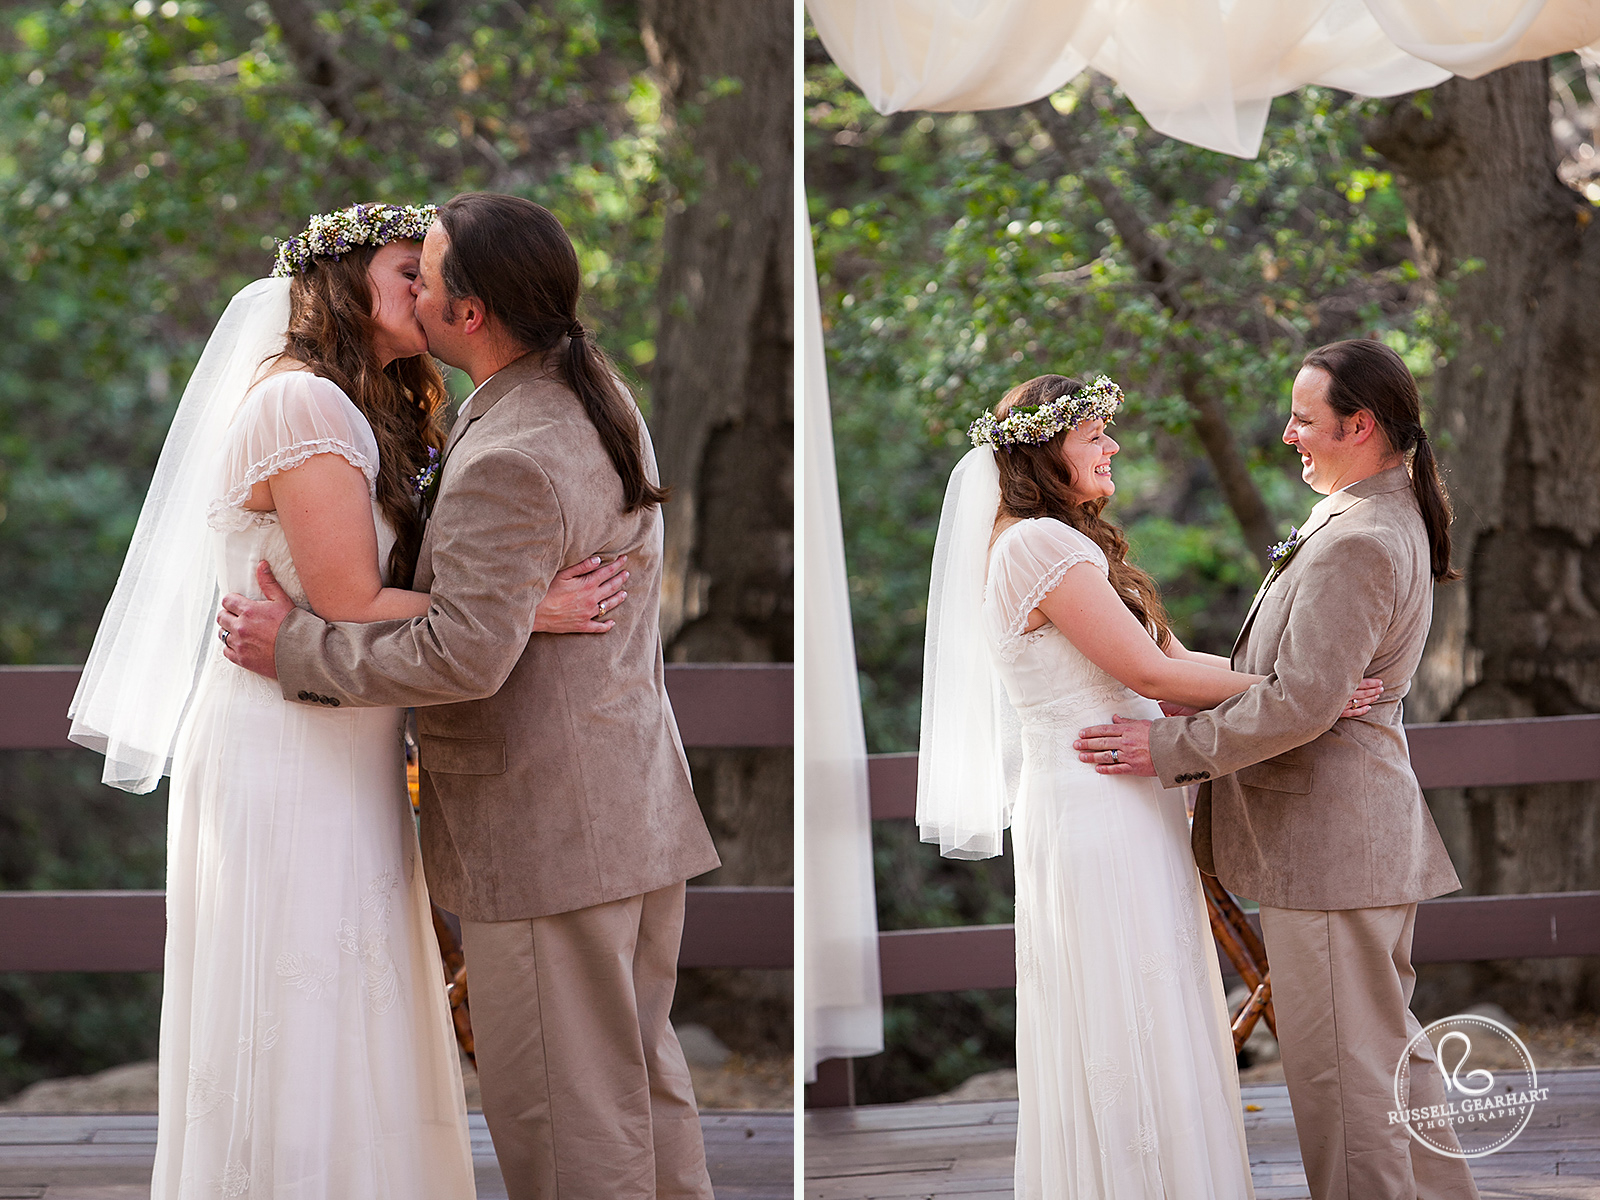 First Kiss – Orange County Wedding – Russell Gearhart Photography – www.gearhartphoto.com  